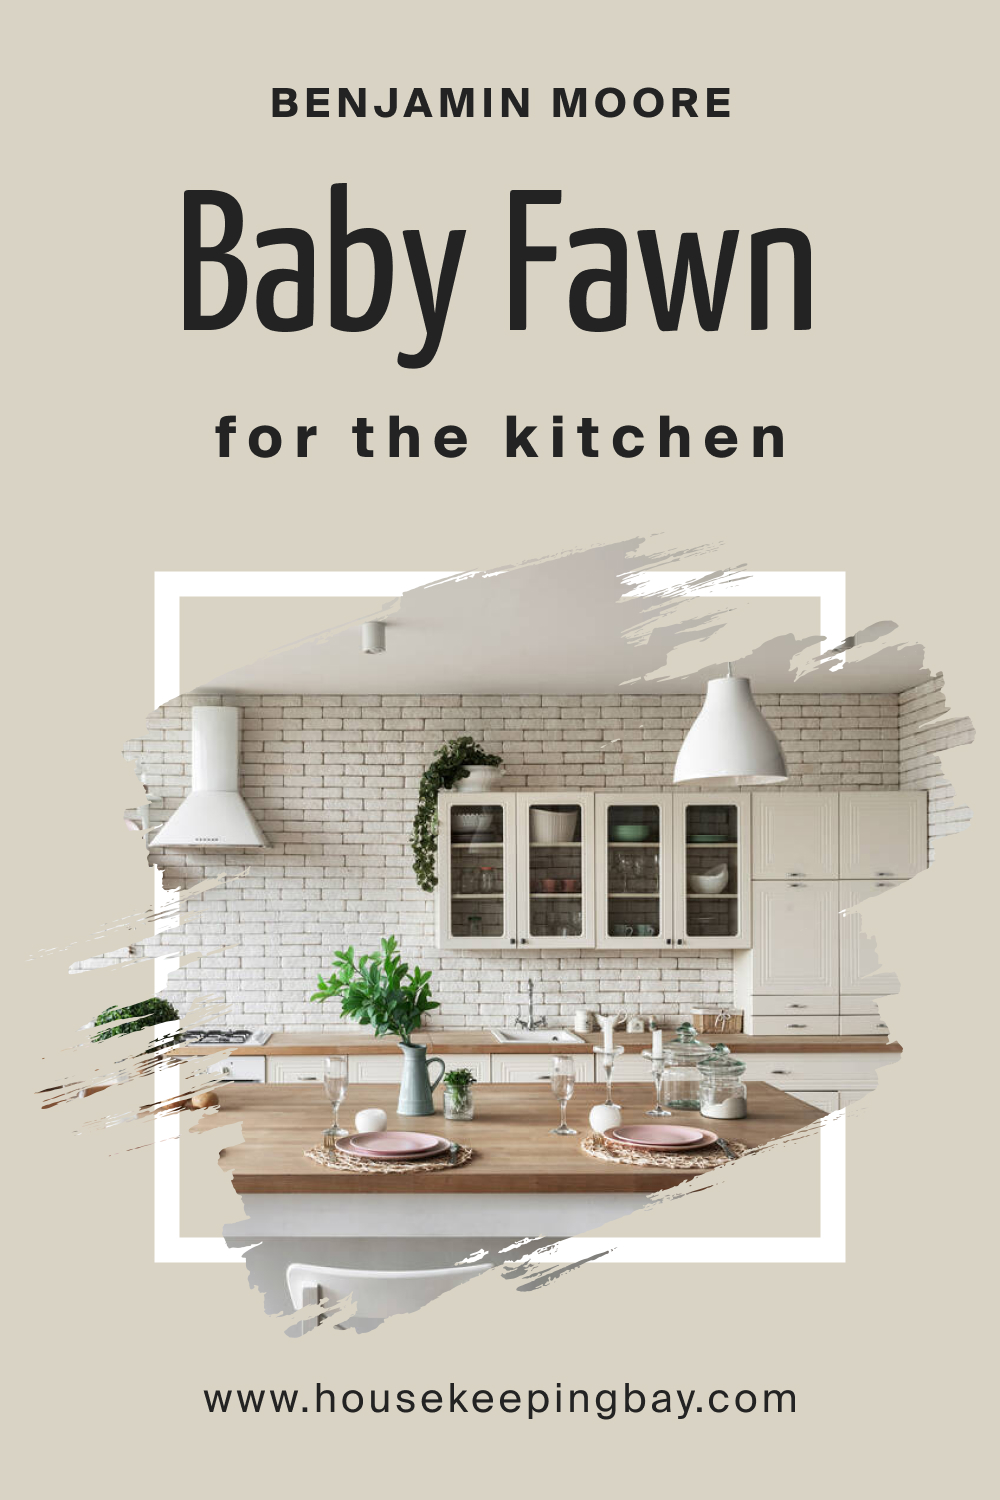 Benjamin Moore. Baby Fawn OC 15 for the Kitchen